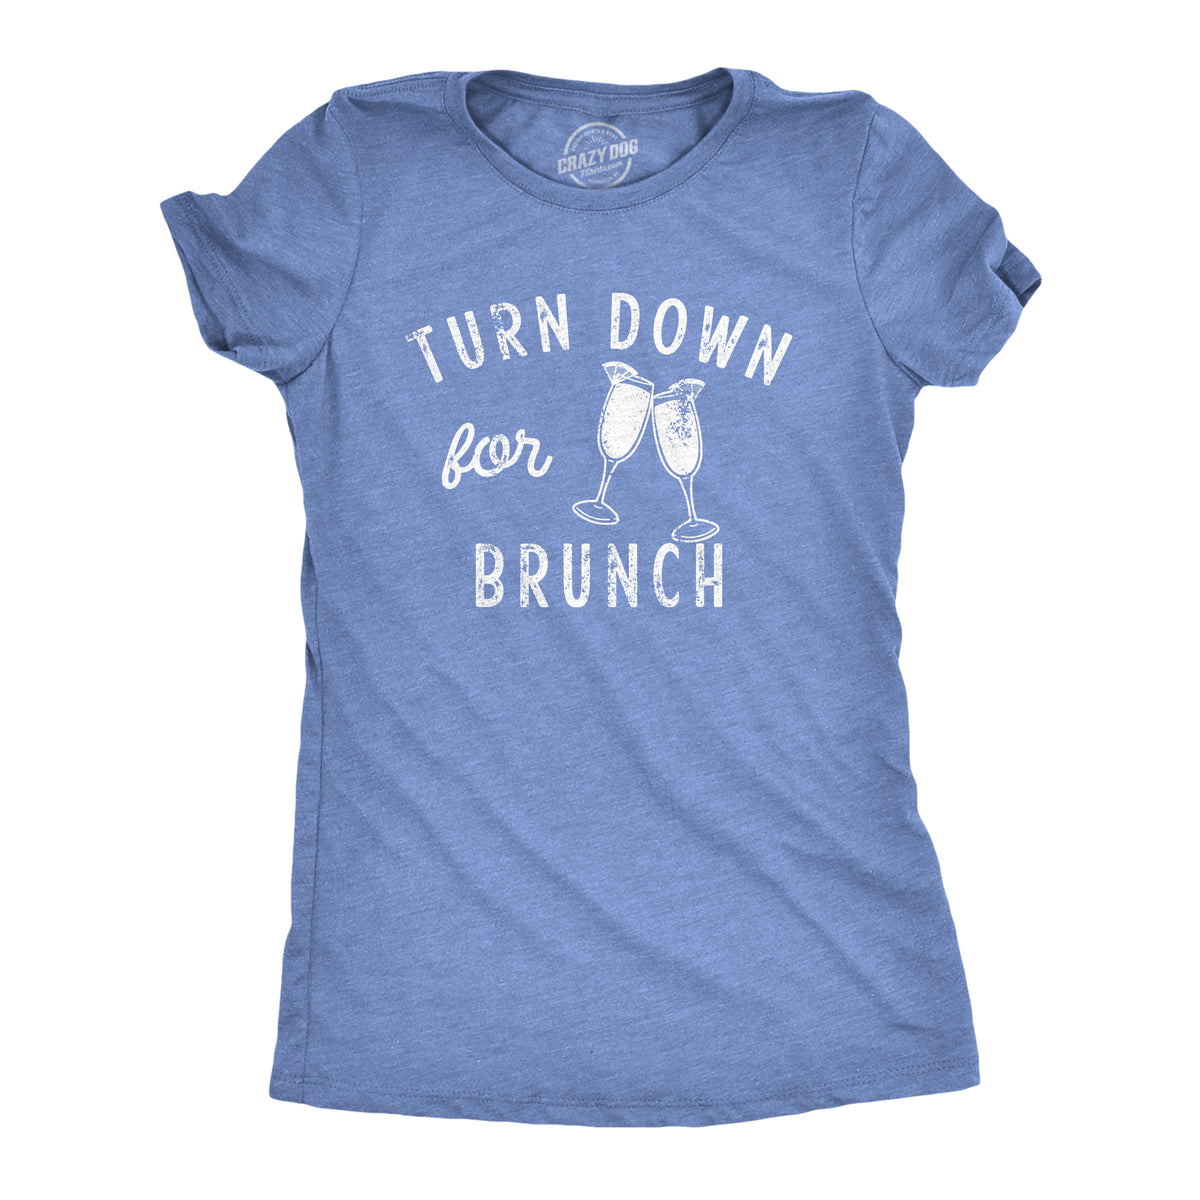 Funny Light Heather Blue - BRUNCH Turn Down For Brunch Womens T Shirt Nerdy Food Drinking Tee